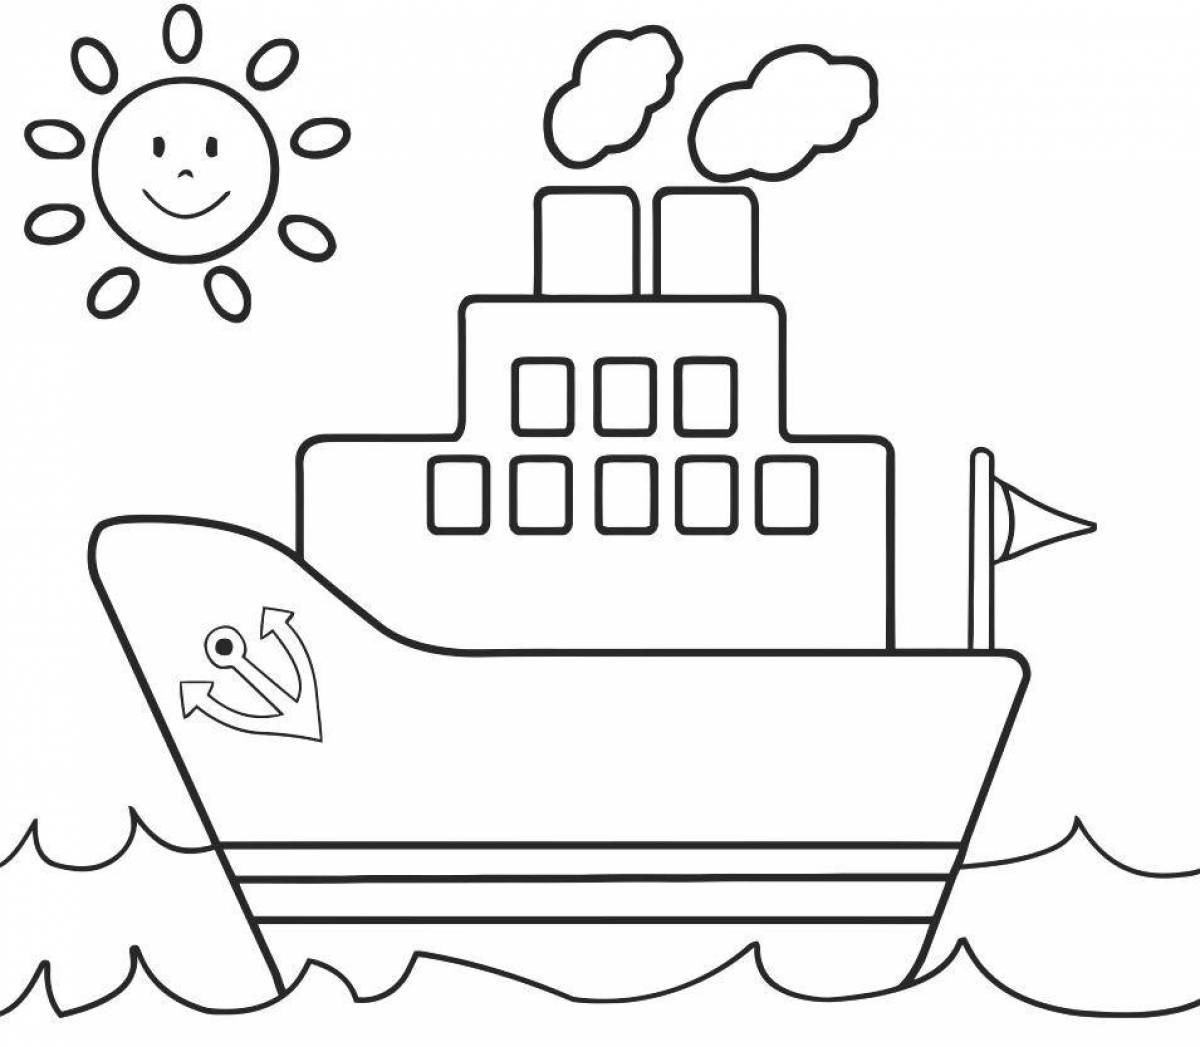 Playful boat coloring page for kids